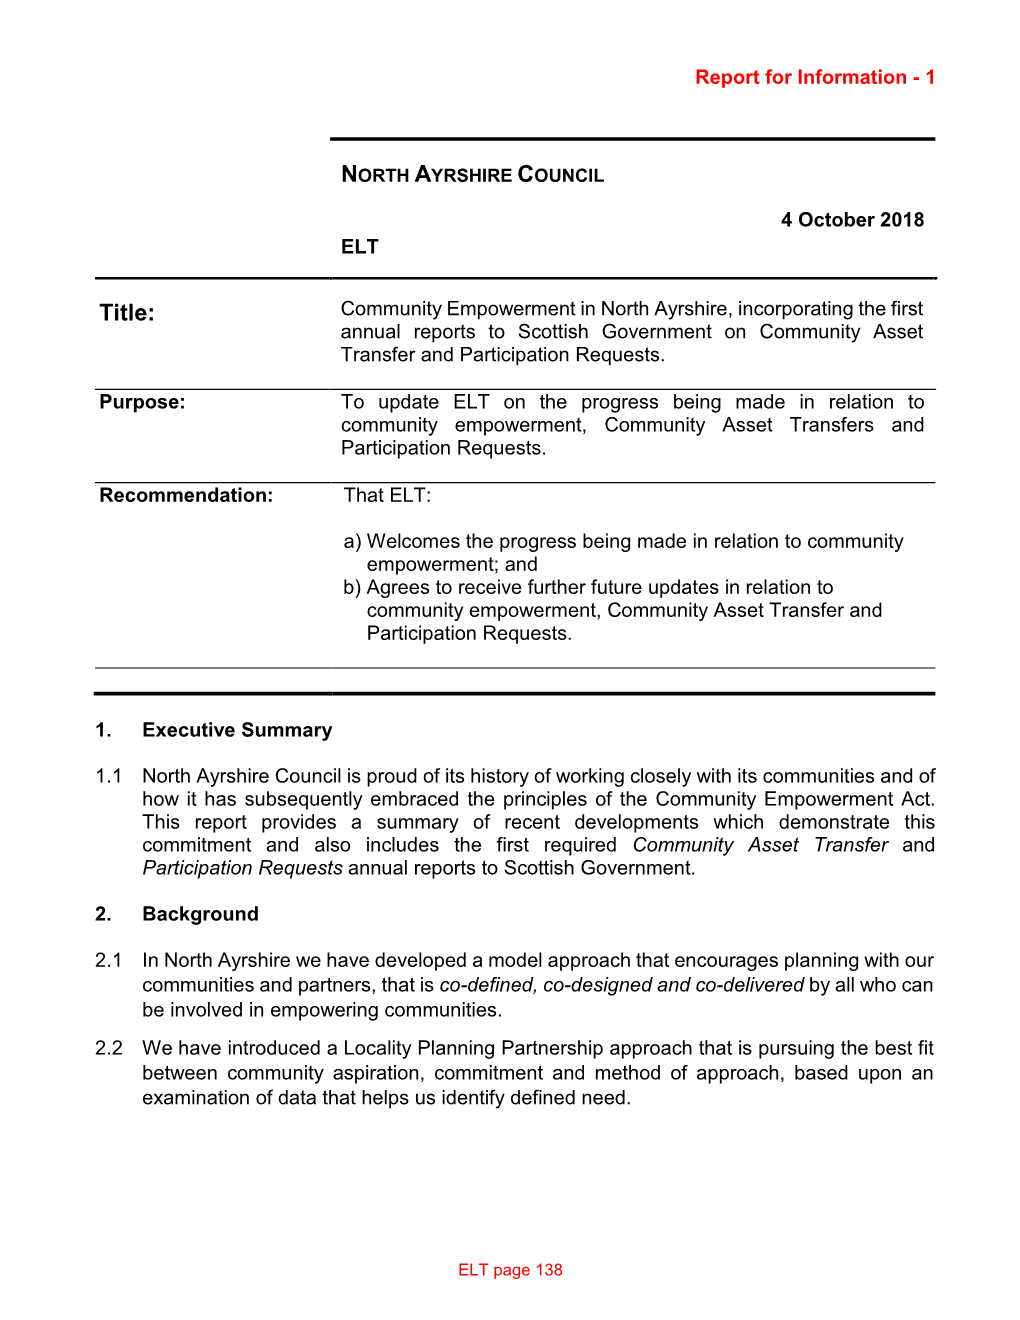 Title: Community Empowerment in North Ayrshire, Incorporating the First Annual Reports to Scottish Government on Community Asset Transfer and Participation Requests